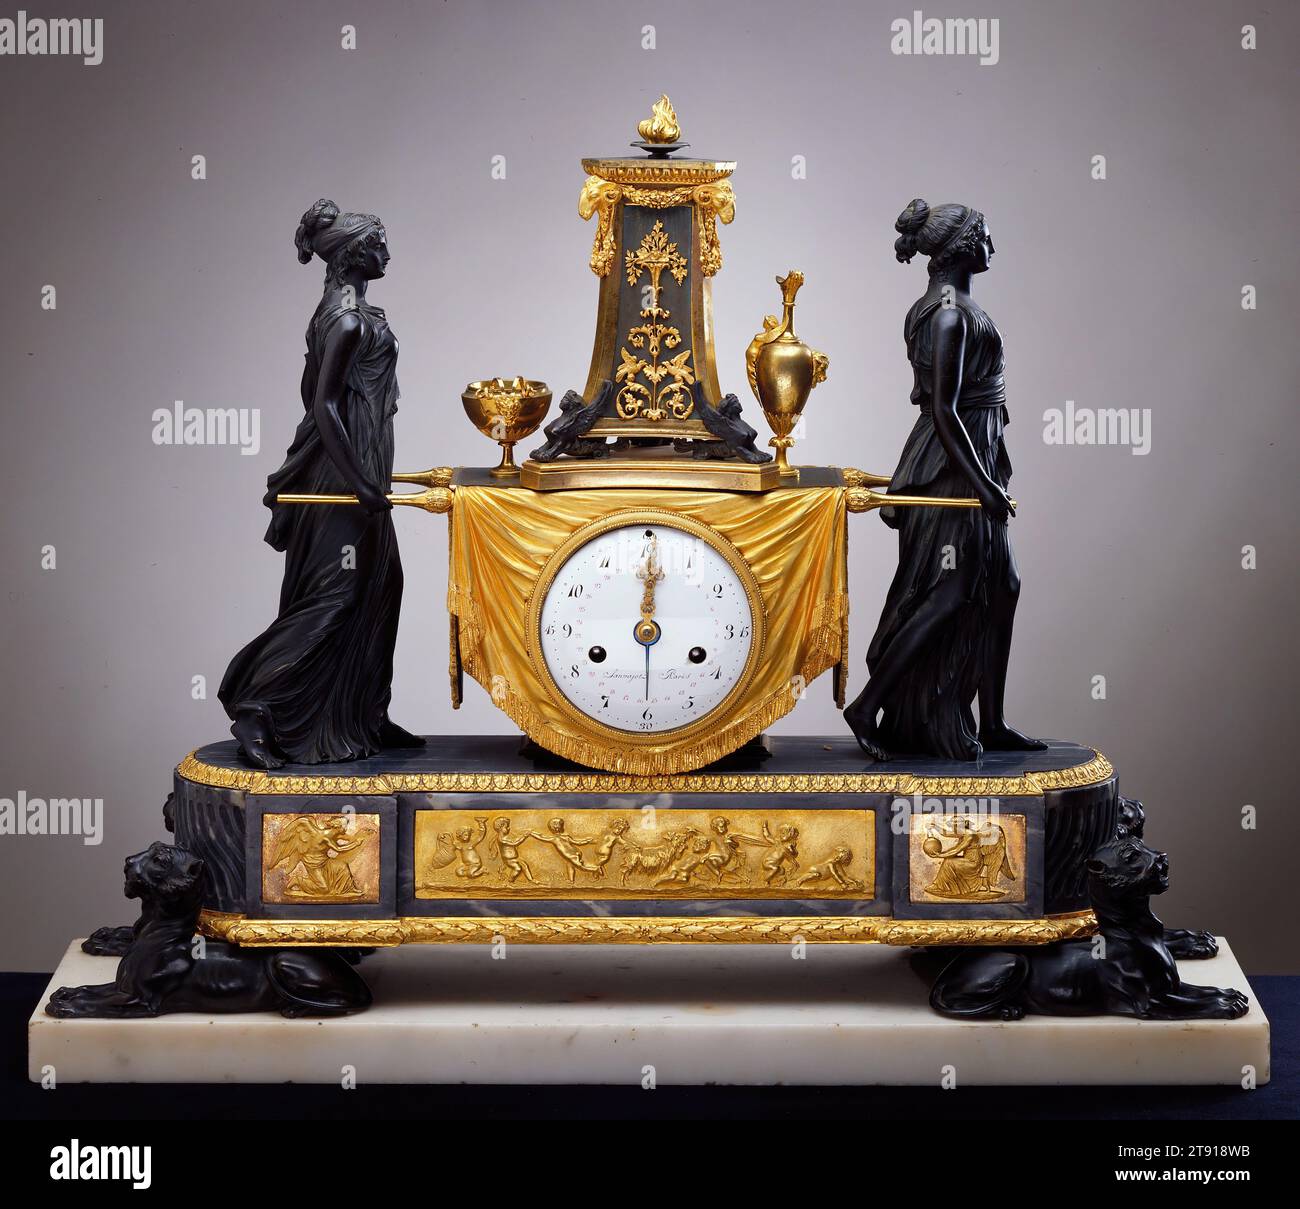 Clock with vestals, c. 1790, Pierre-Philippe Thomire; Manufacturer: Clockworks by Sauvageot, French, Paris, 20 1/2 x 25 1/2 x 7 in. (52.07 x 64.77 x 17.78 cm), Bronze, gilt bronze, enameled dial, marble, France, 18th century, French queen Marie-Antoinette, when told that her people had no bread to eat, allegedly said, 'Then let them eat cake.' The story is untrue, but she did seem out of touch with the common man. For example, she had a clock just like this in her bathroom at a time when wealthy individuals might have one clock in the whole house. Stock Photo